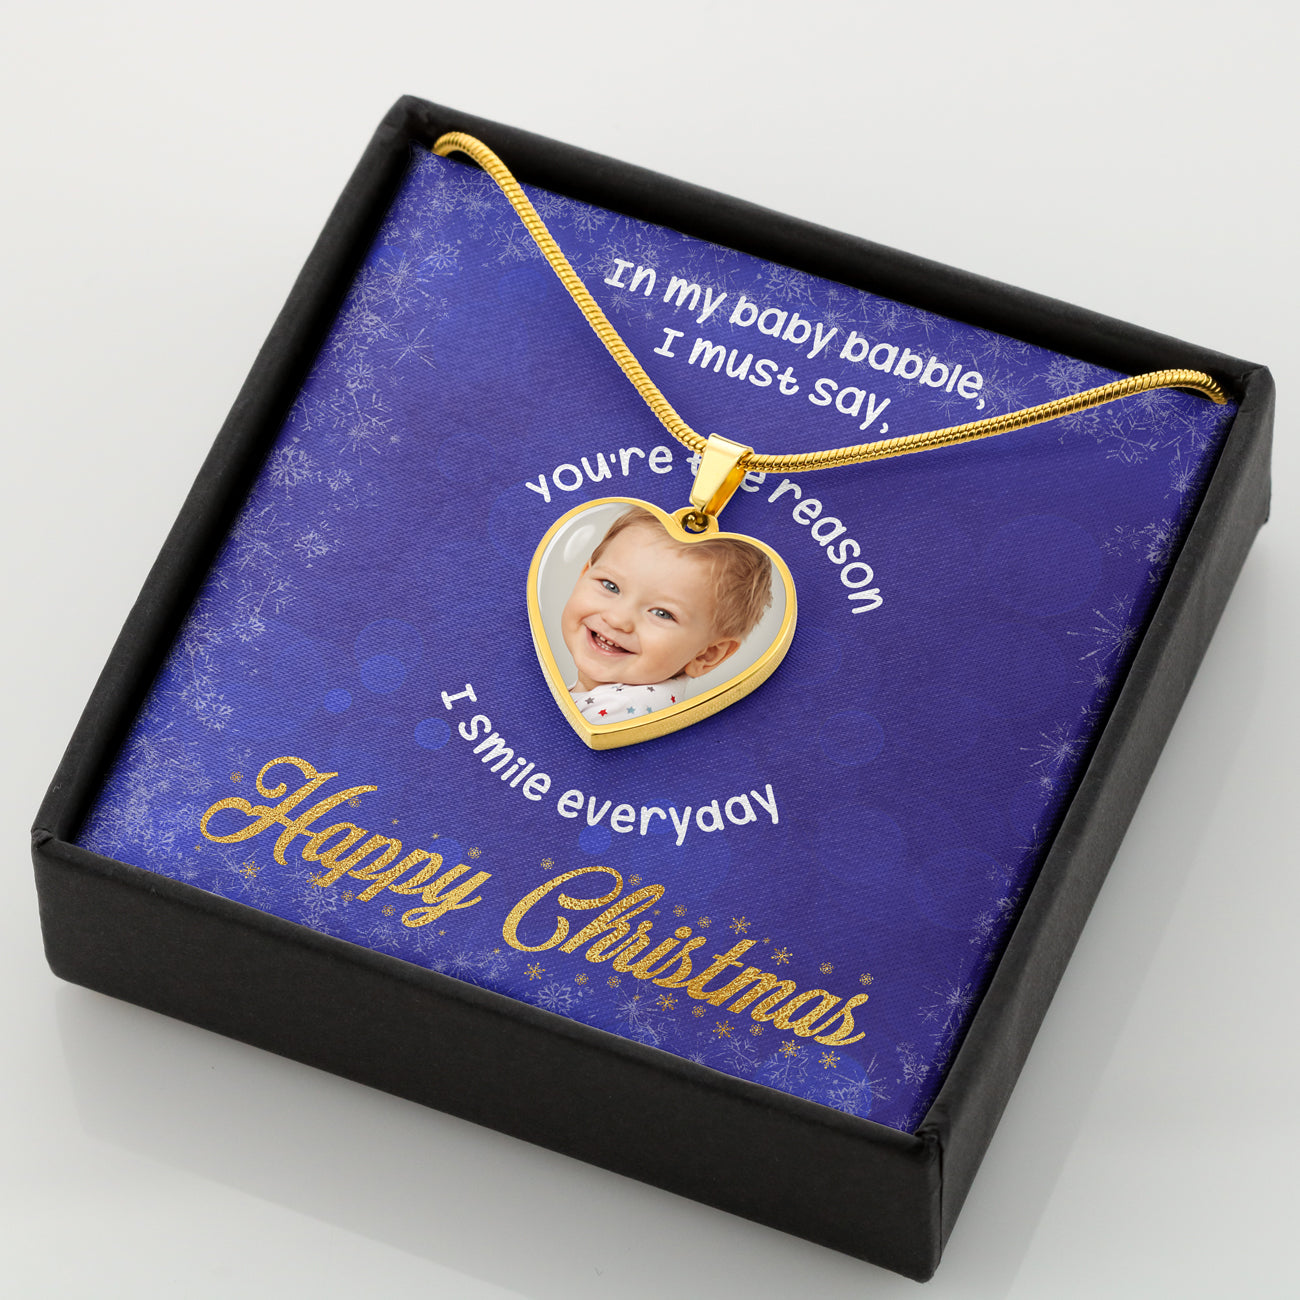 In my Baby babble, I must say, You're the reason I smile everday Personalized Photo necklace (with box)